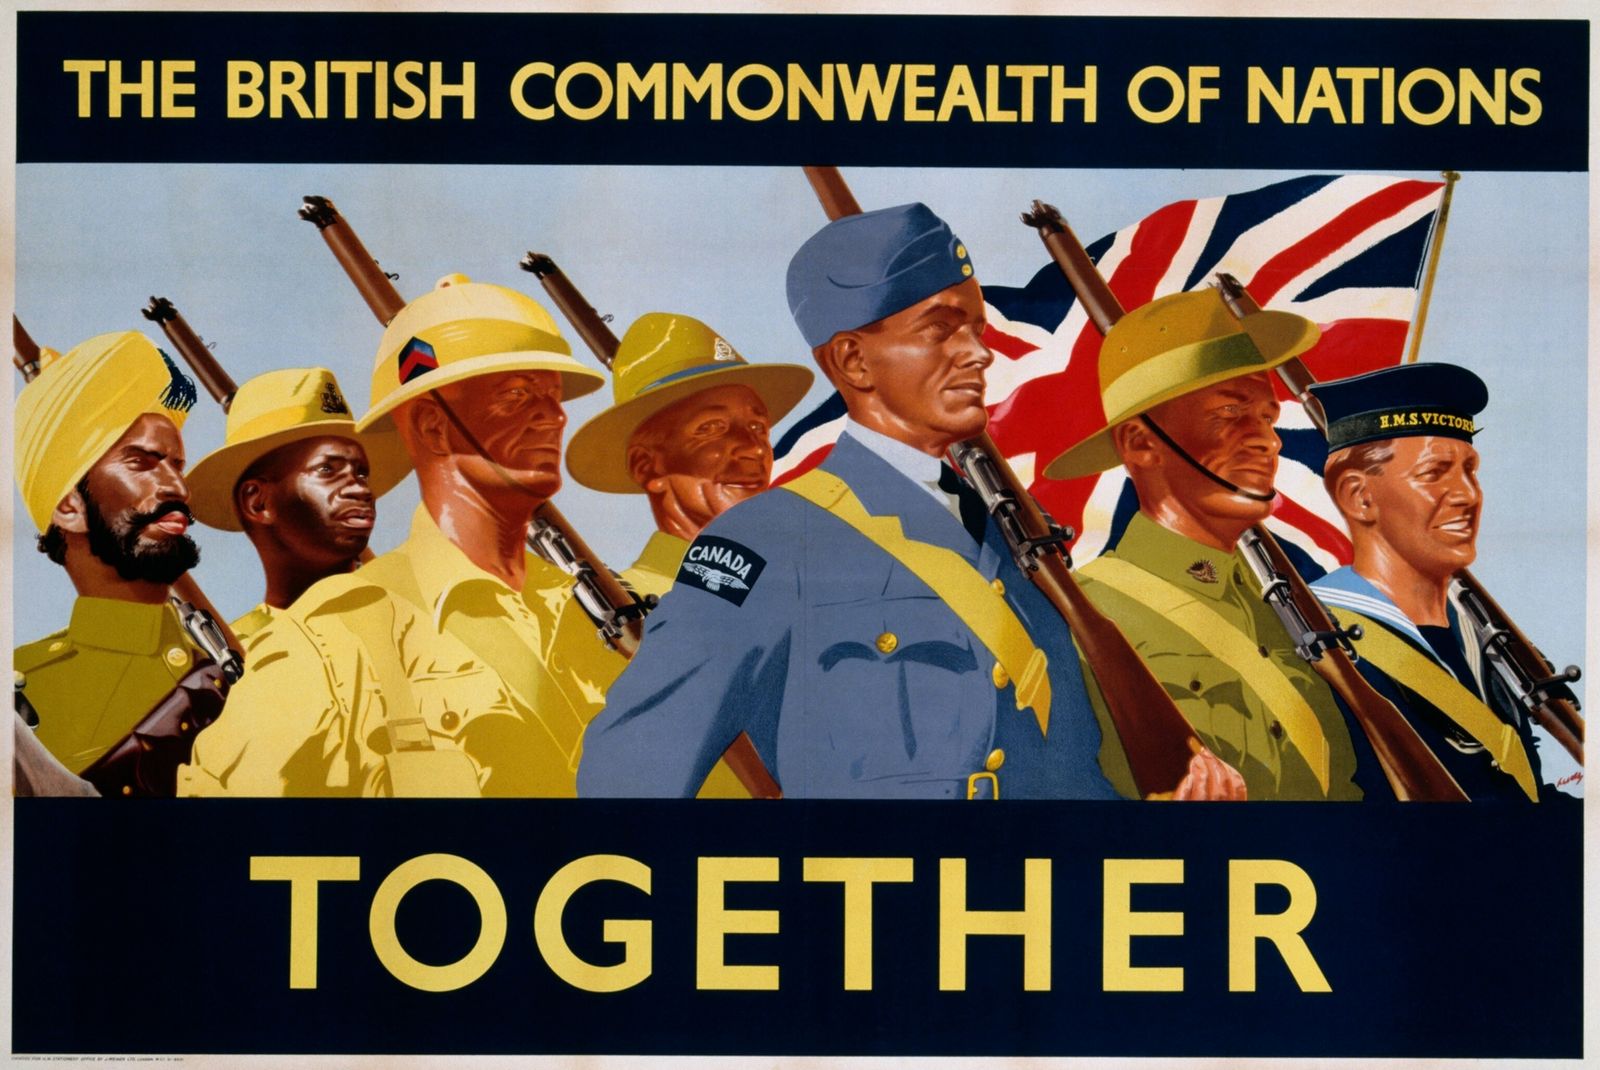 How did the Commonwealth emerge from the British Empire